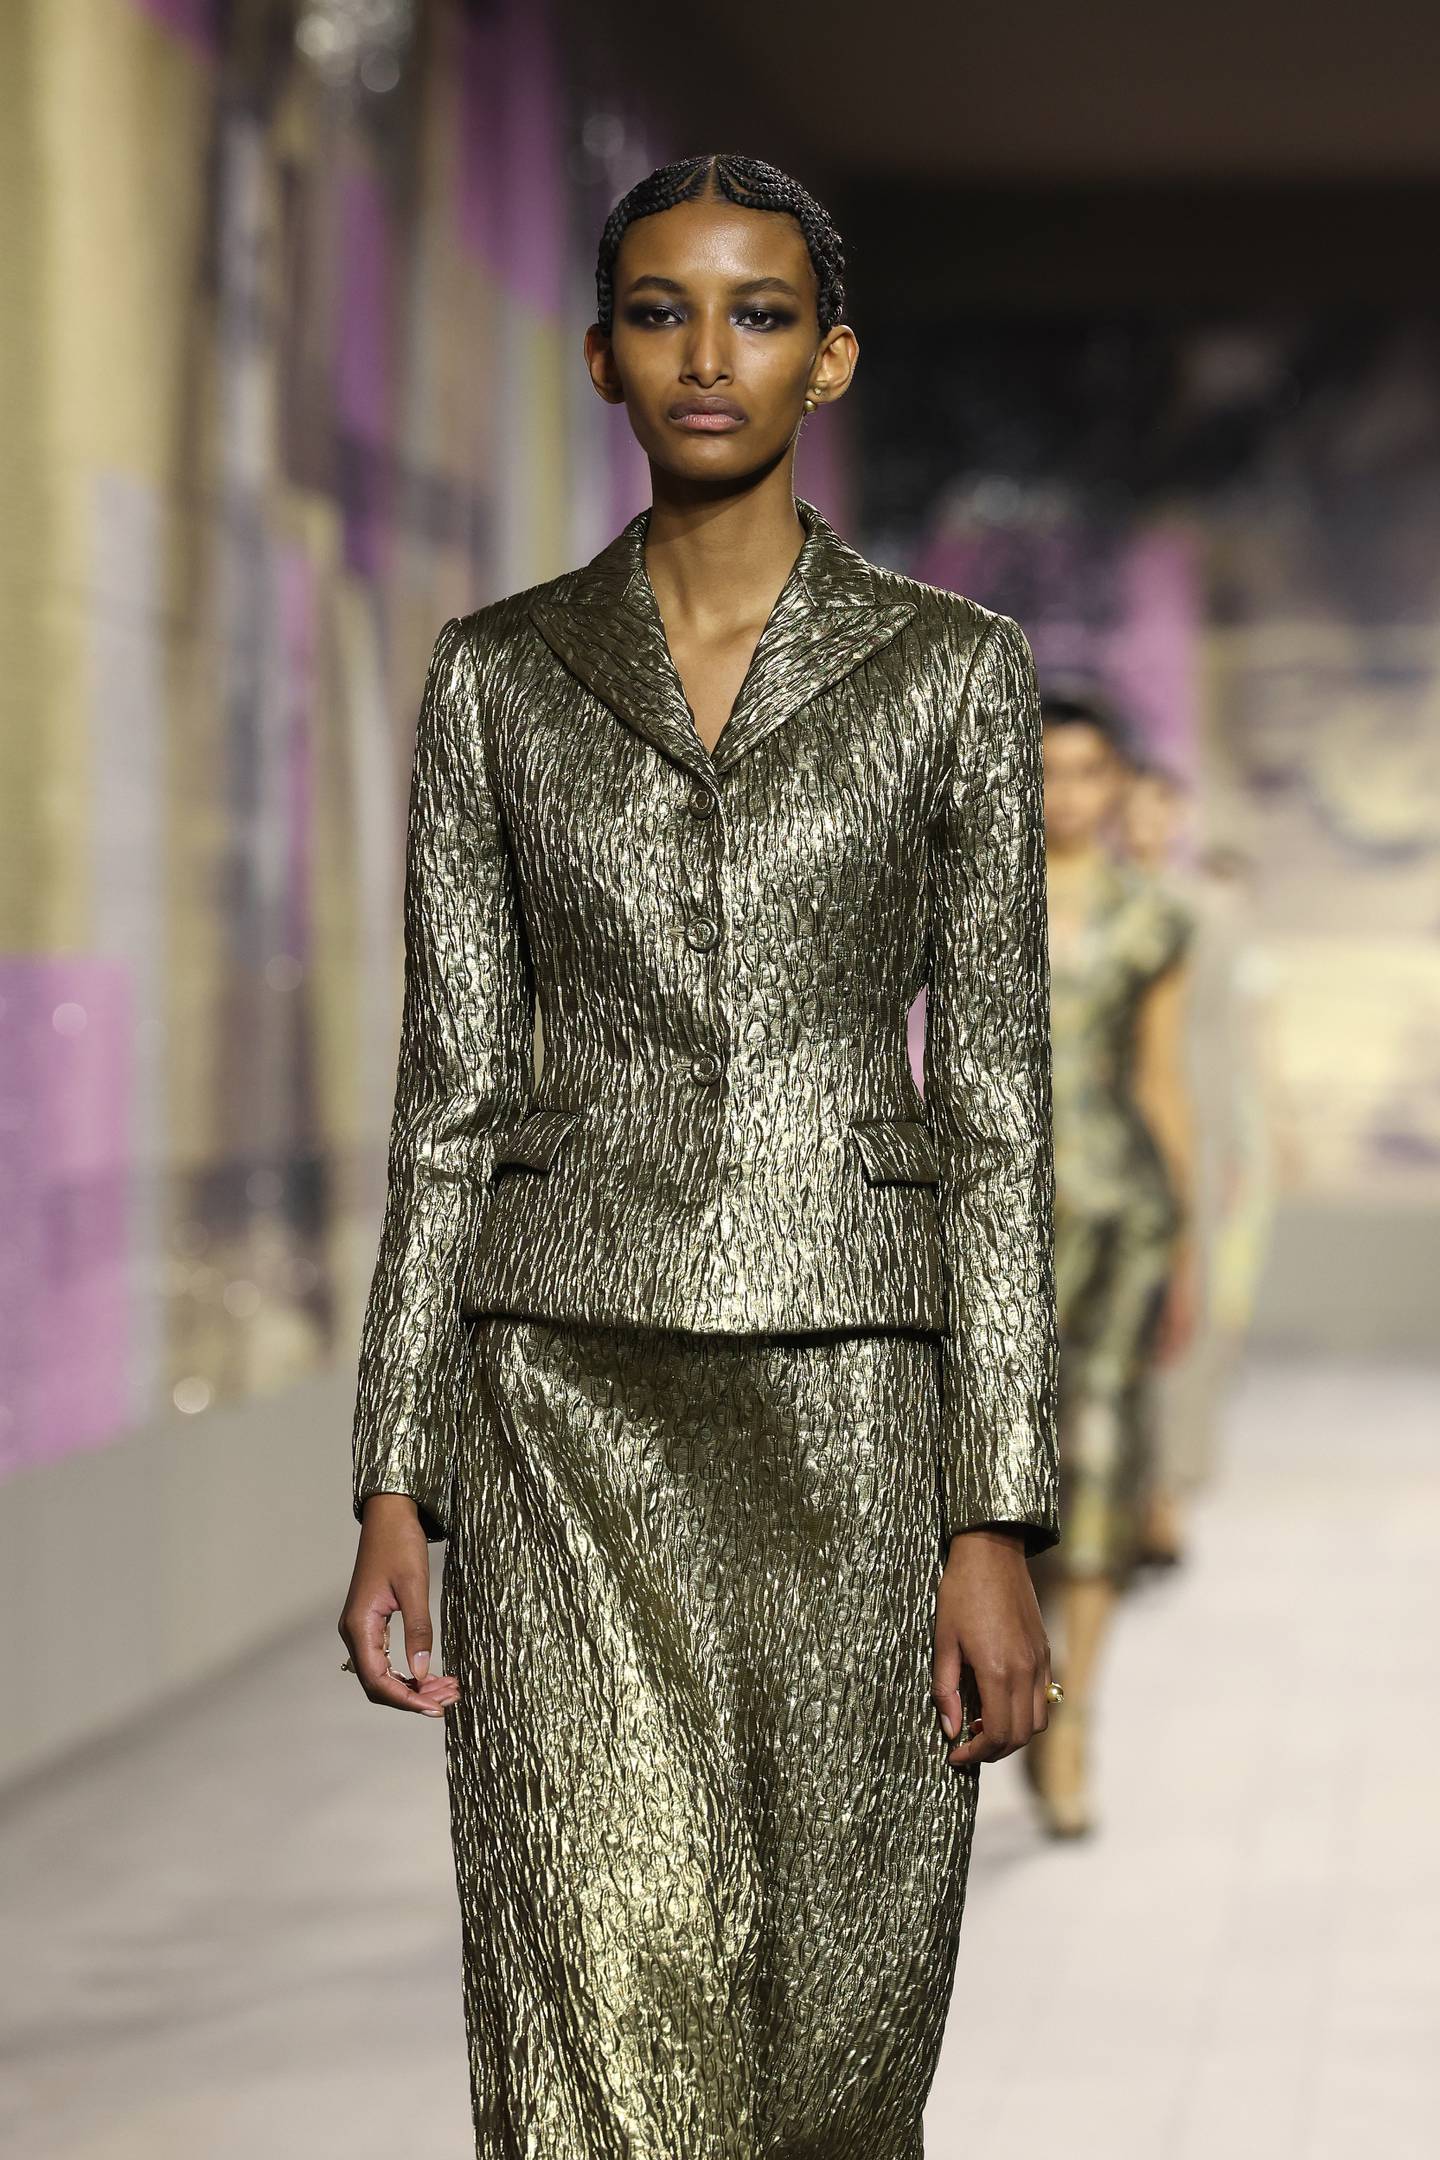 Impeccable tailoring at the Christian Dior Haute Couture spring/summer 2023 show, where gold cloth has been cut into a loosely shaped skirted suit. Getty Images